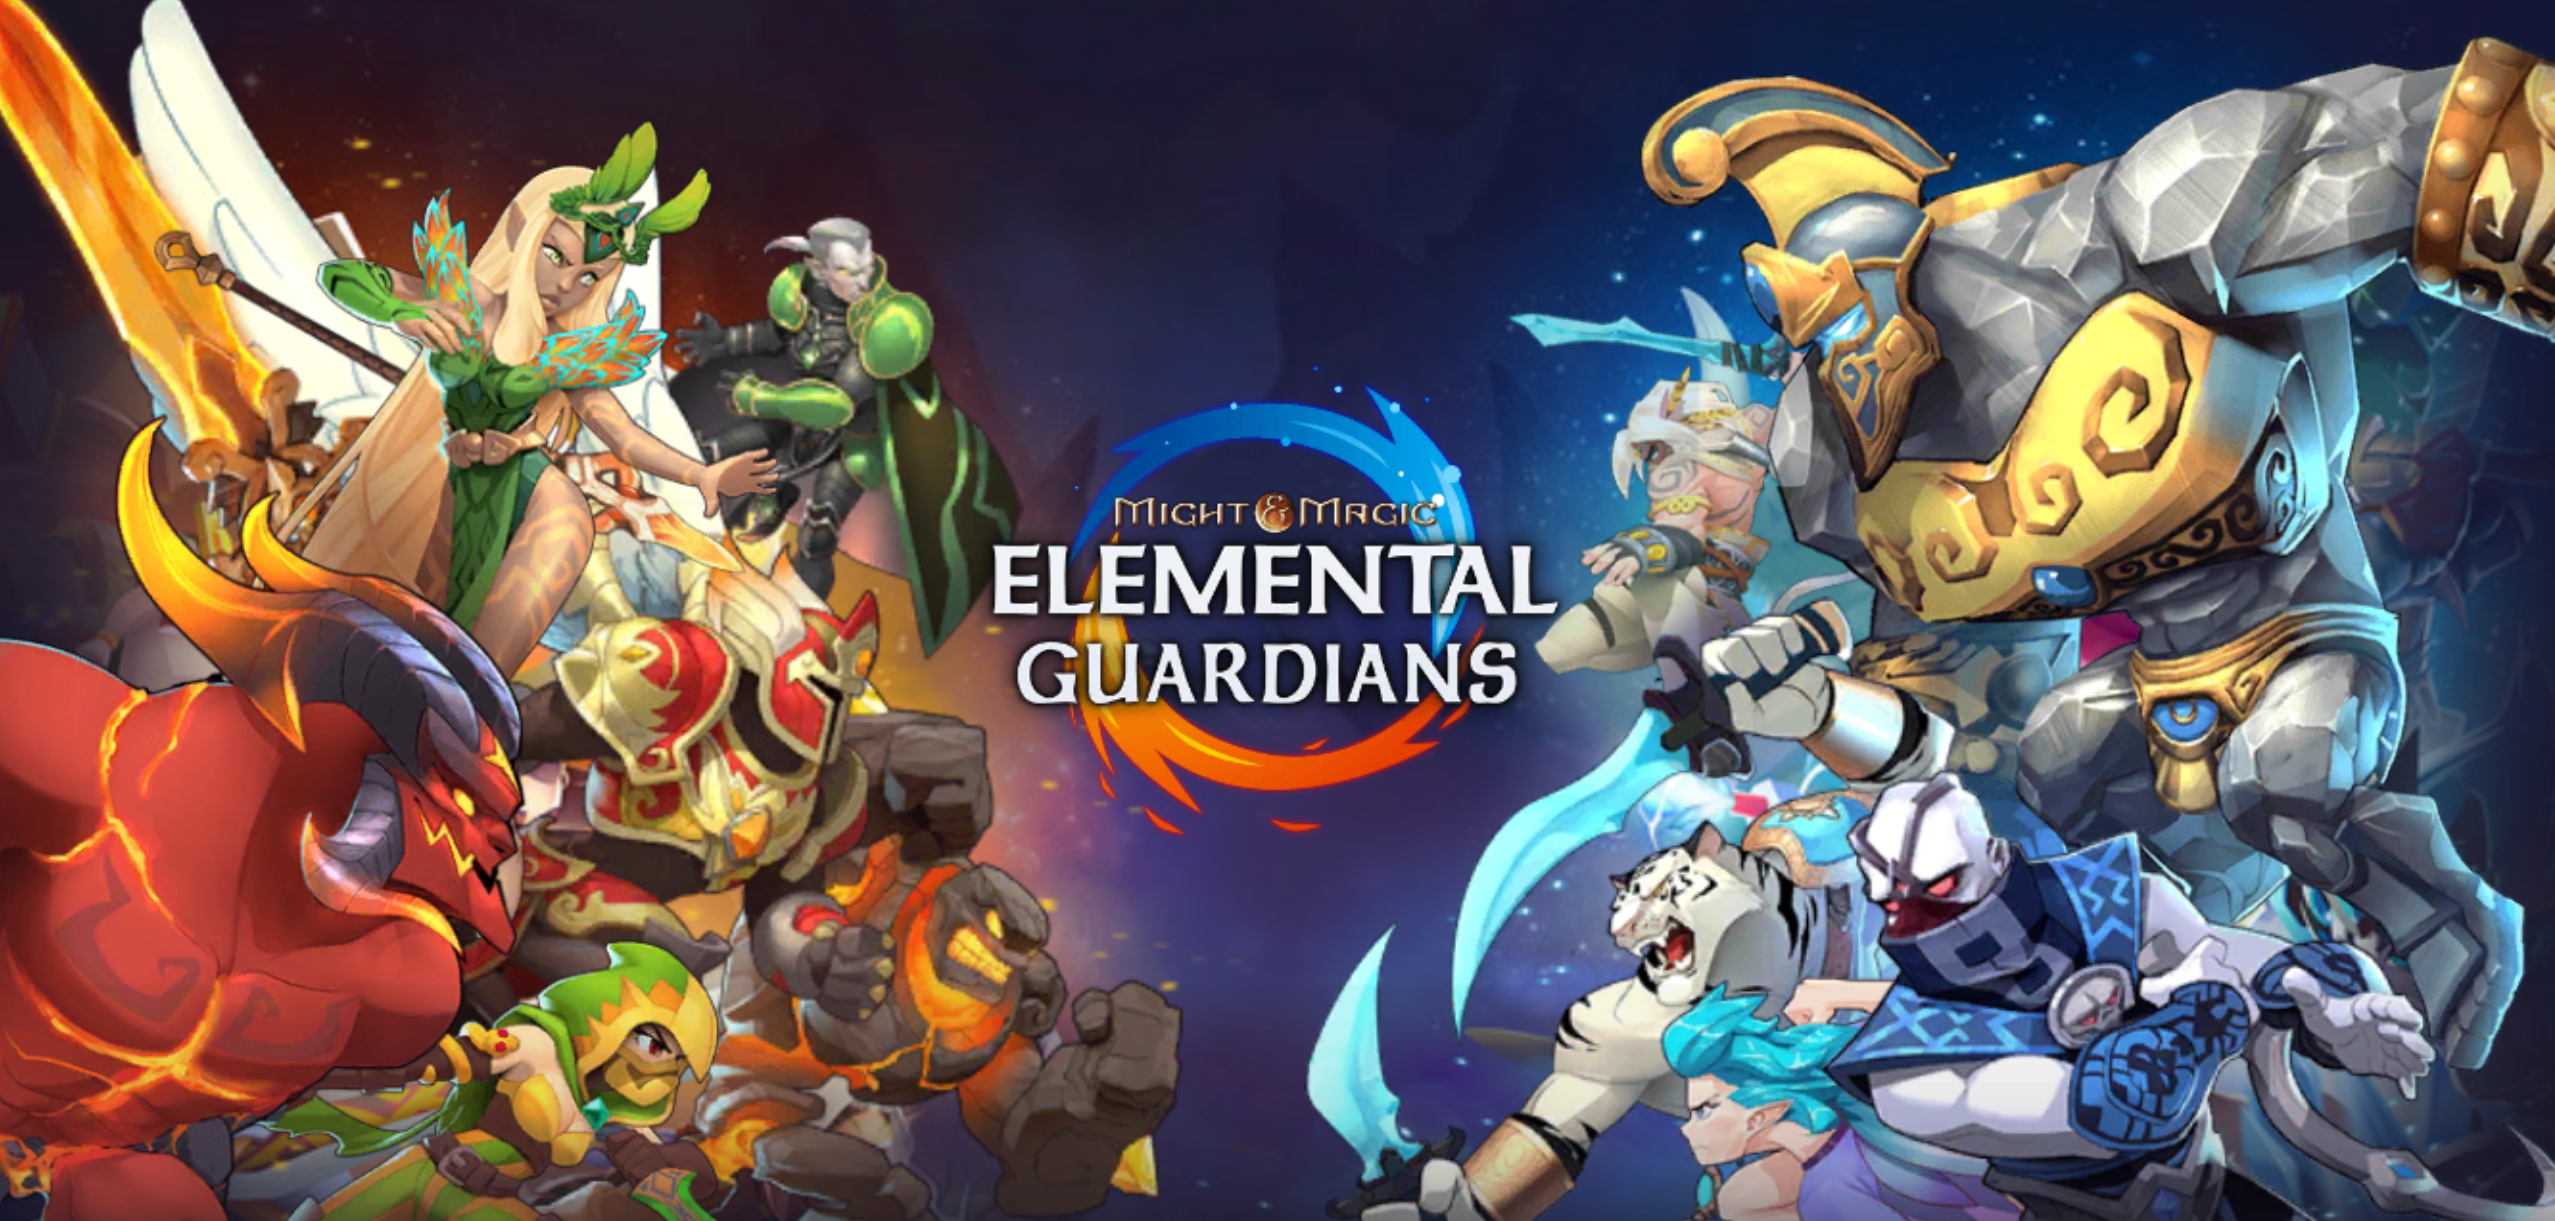 Might & Magic: Elemental Guardians Guide [Tips and Tricks]